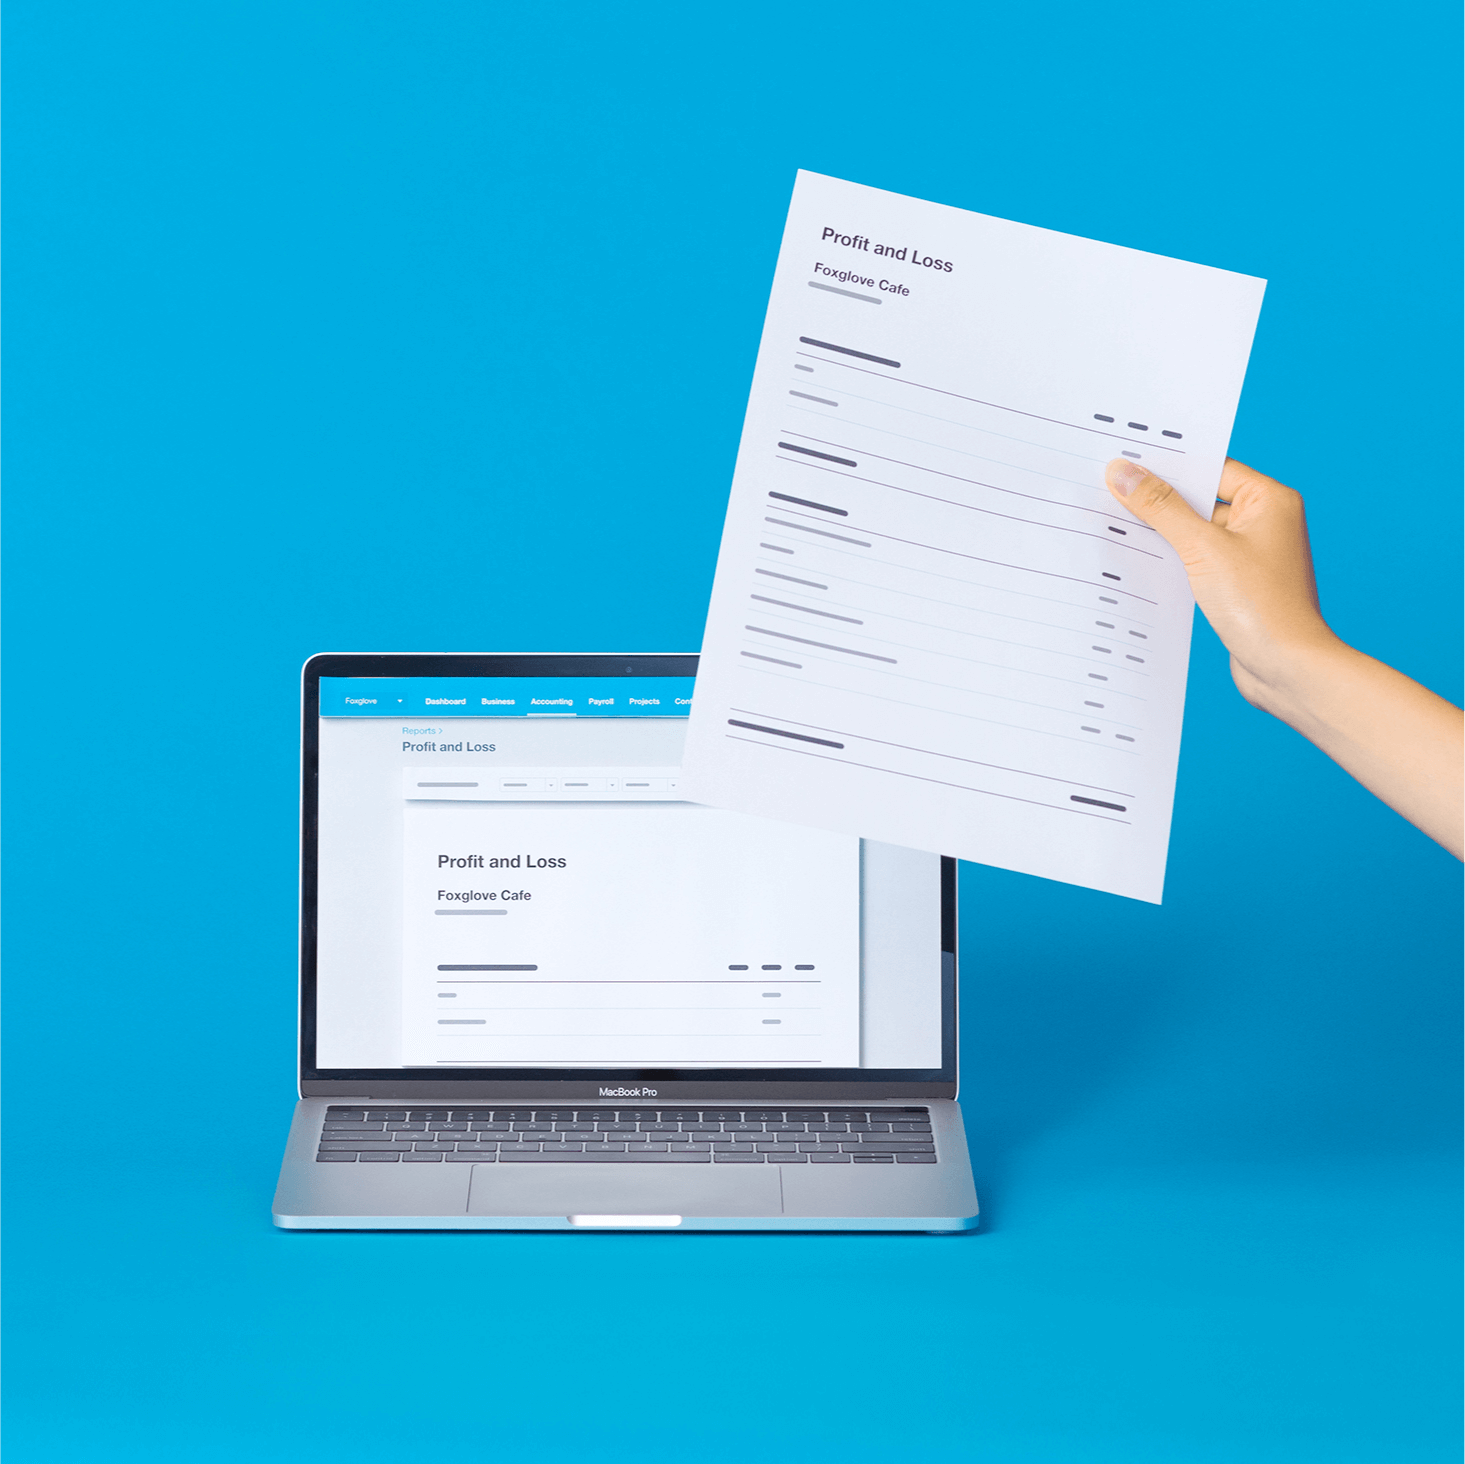 A profit and loss report displays in Xero on a laptop and a copy is printed as well. 